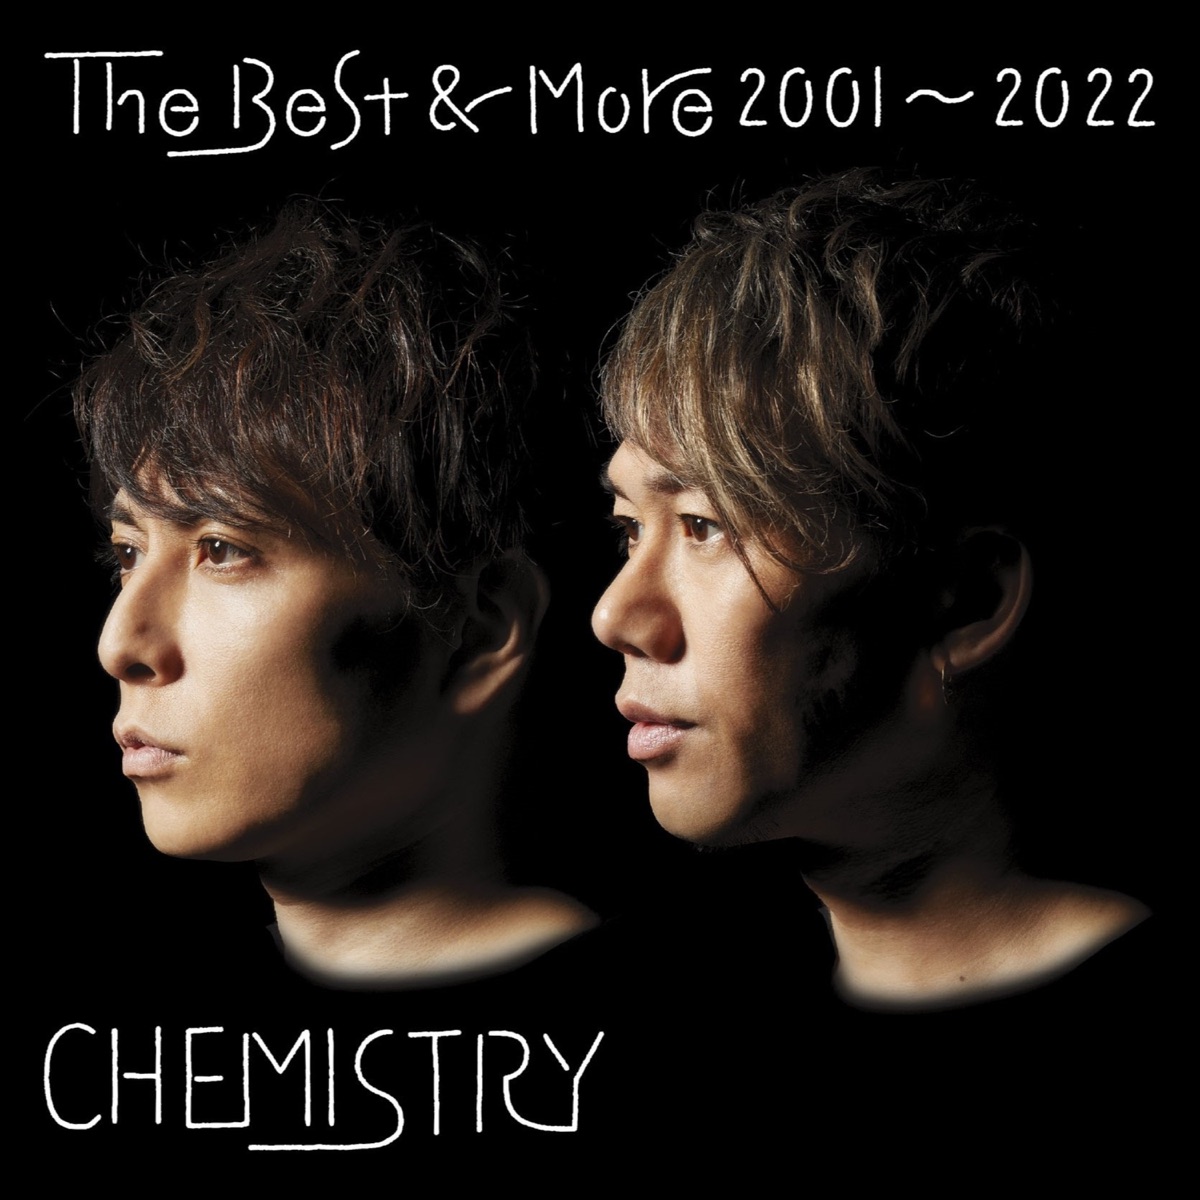 Cover for『CHEMISTRY - Owaranai Uta feat. Reina』from the release『The Best & More 2001～2022』